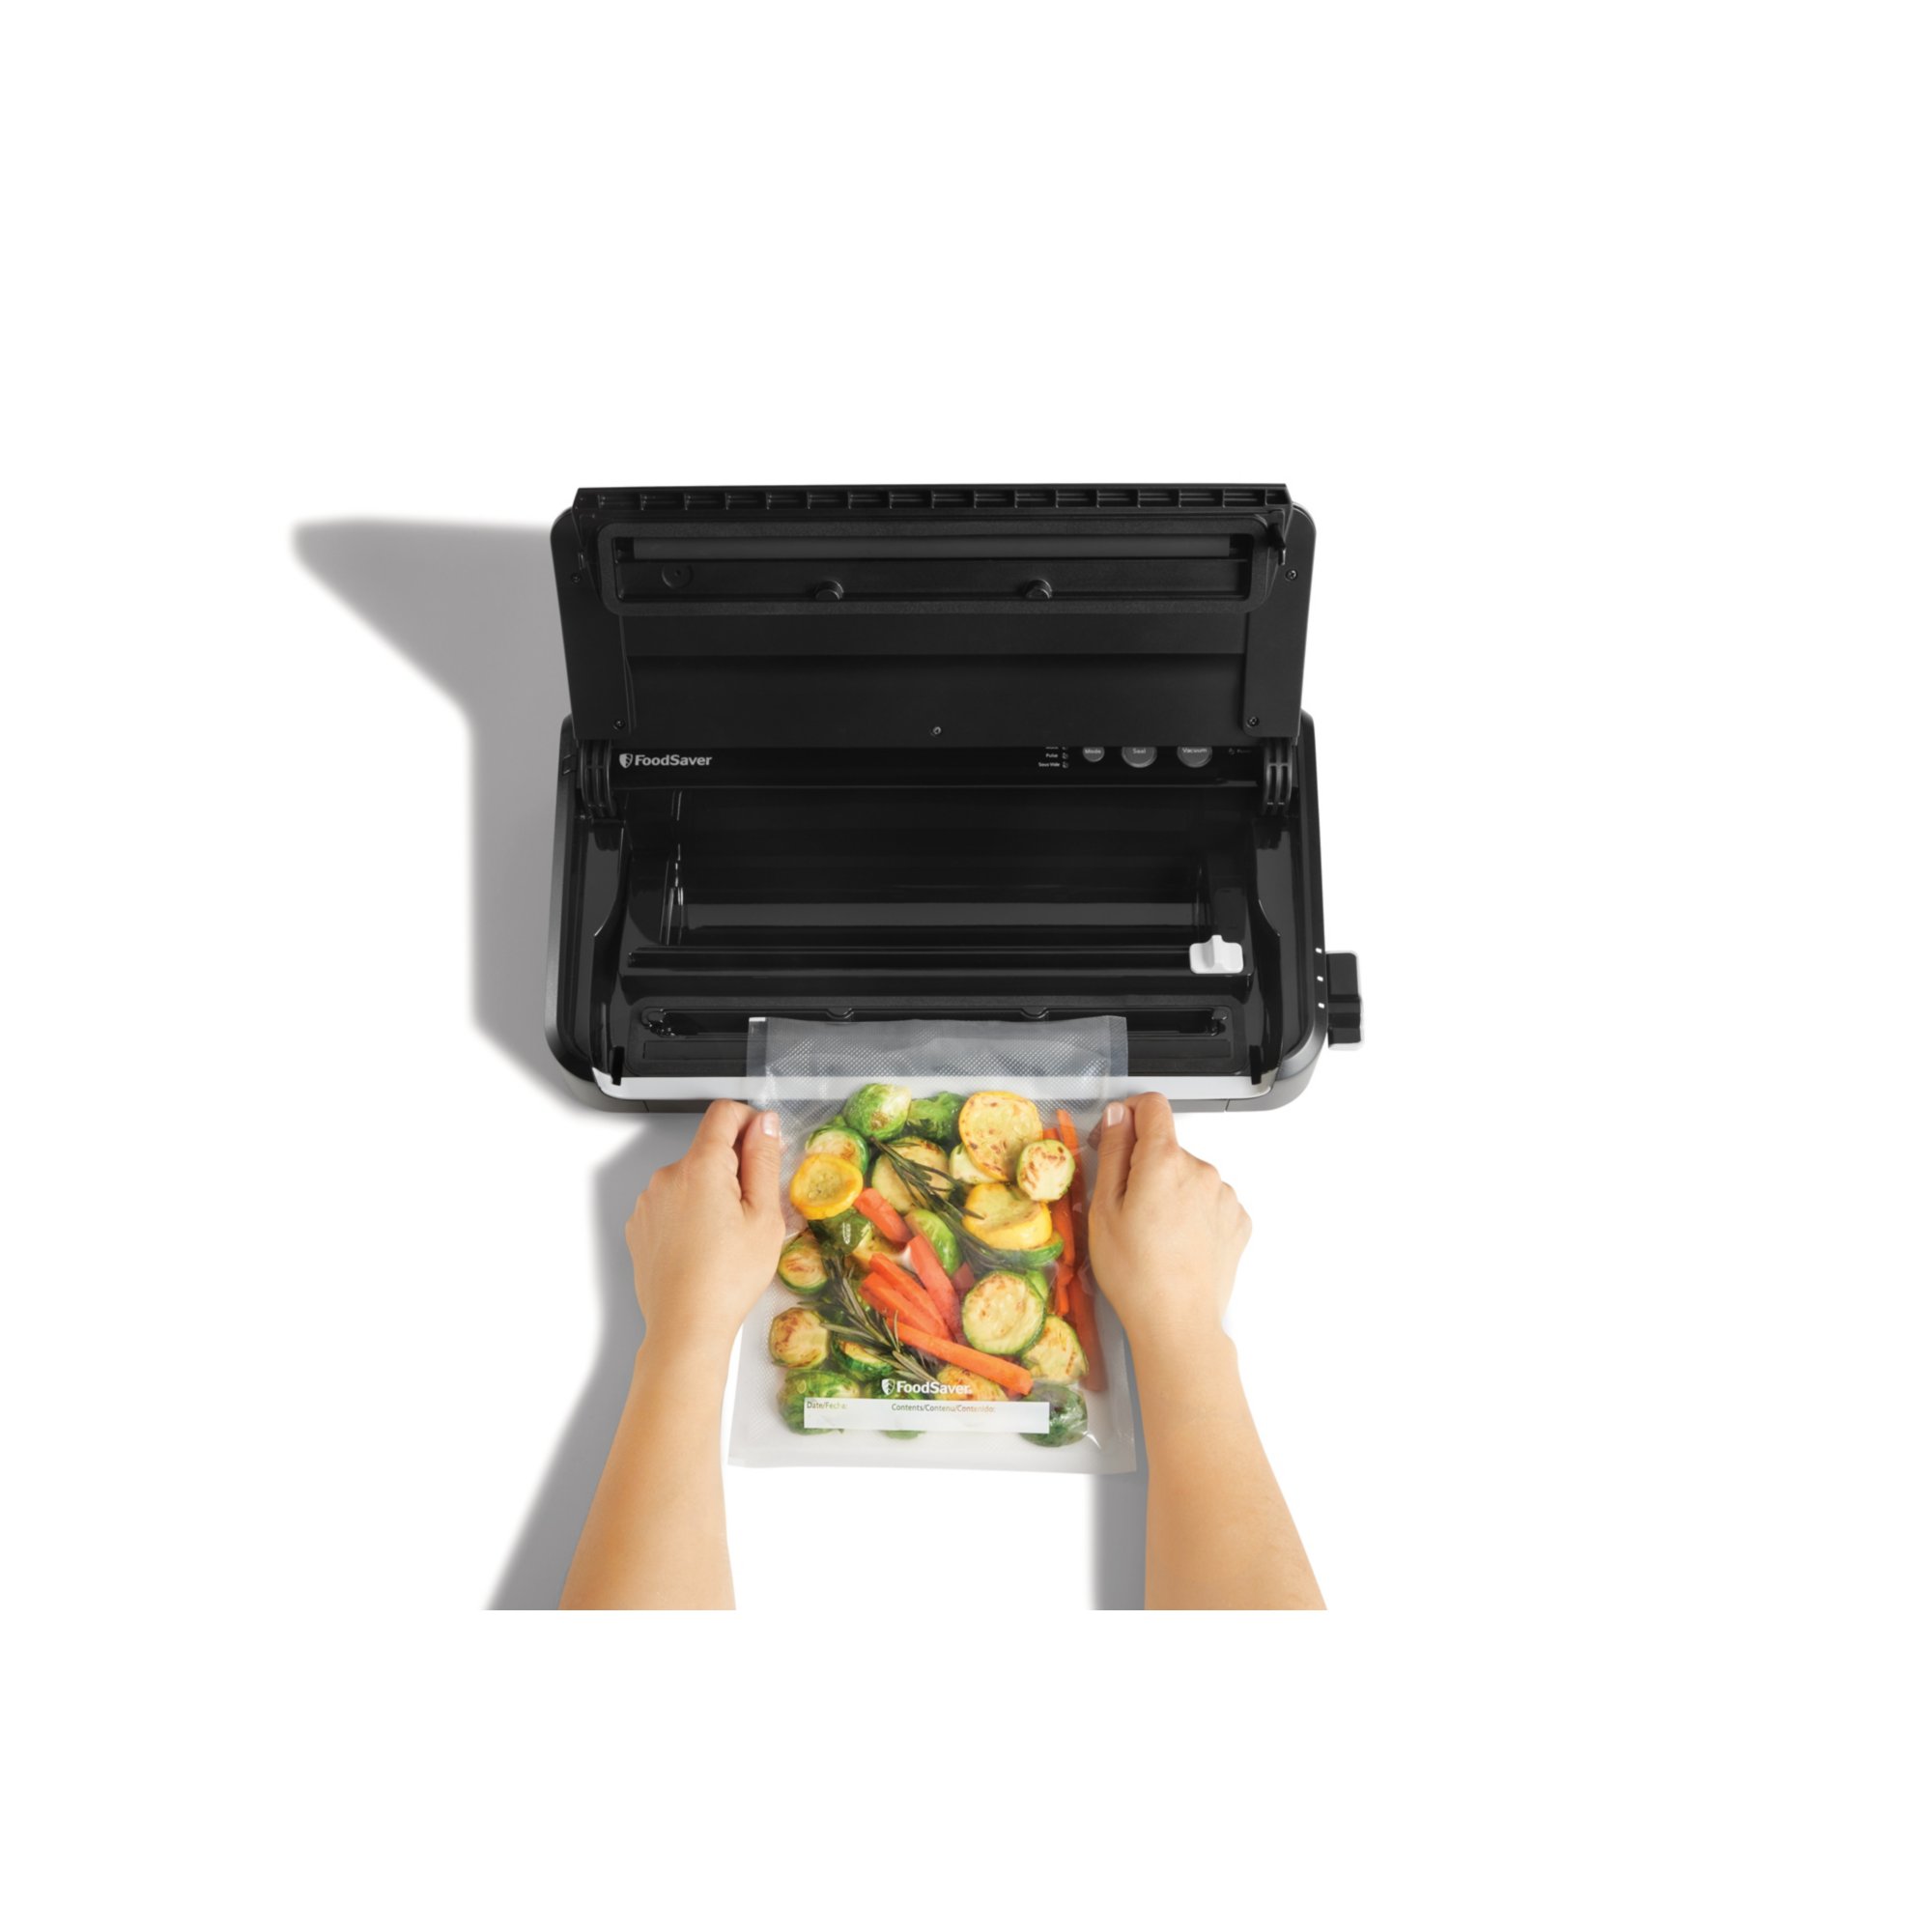 https://newellbrands.scene7.com/is/image/NewellRubbermaid/SAP-foodsaver-FM2900-step-1-with-food-overhead-with-talent-1_White?wid=2000&hei=2000